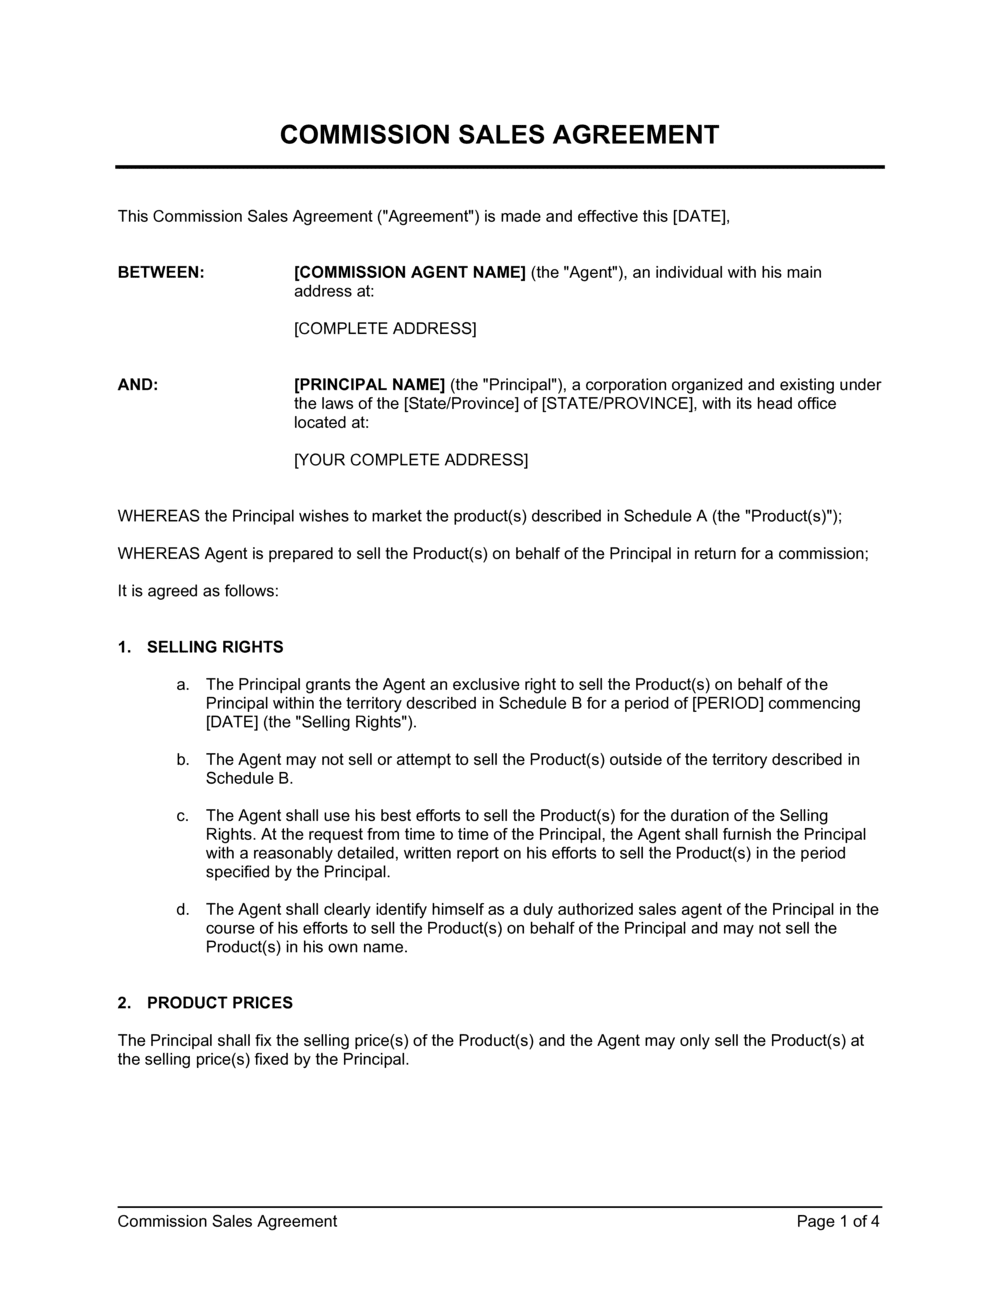 Commission Sales Agreement Template  by Business-in-a-Box™ Intended For legal representation agreement template